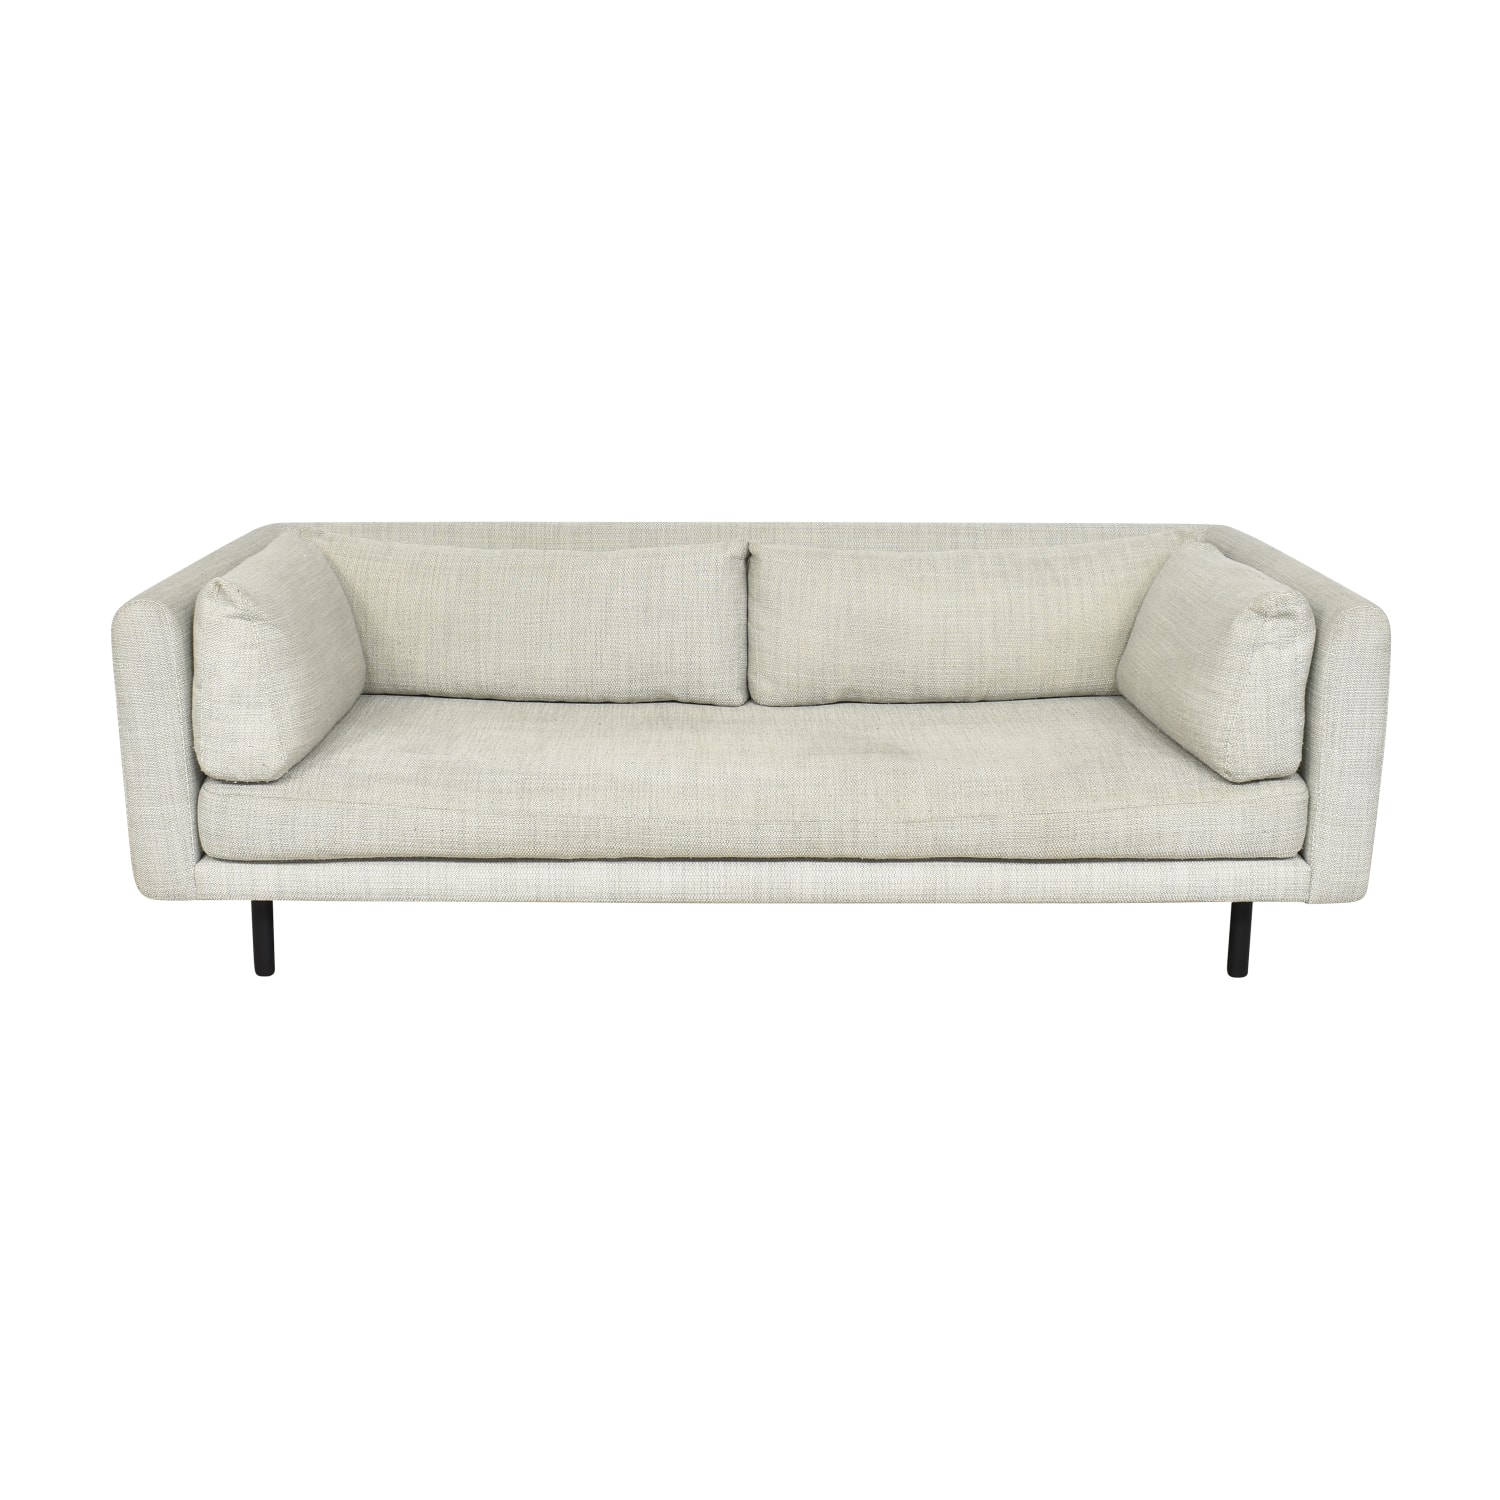 Article Article Lappi Sofa second hand